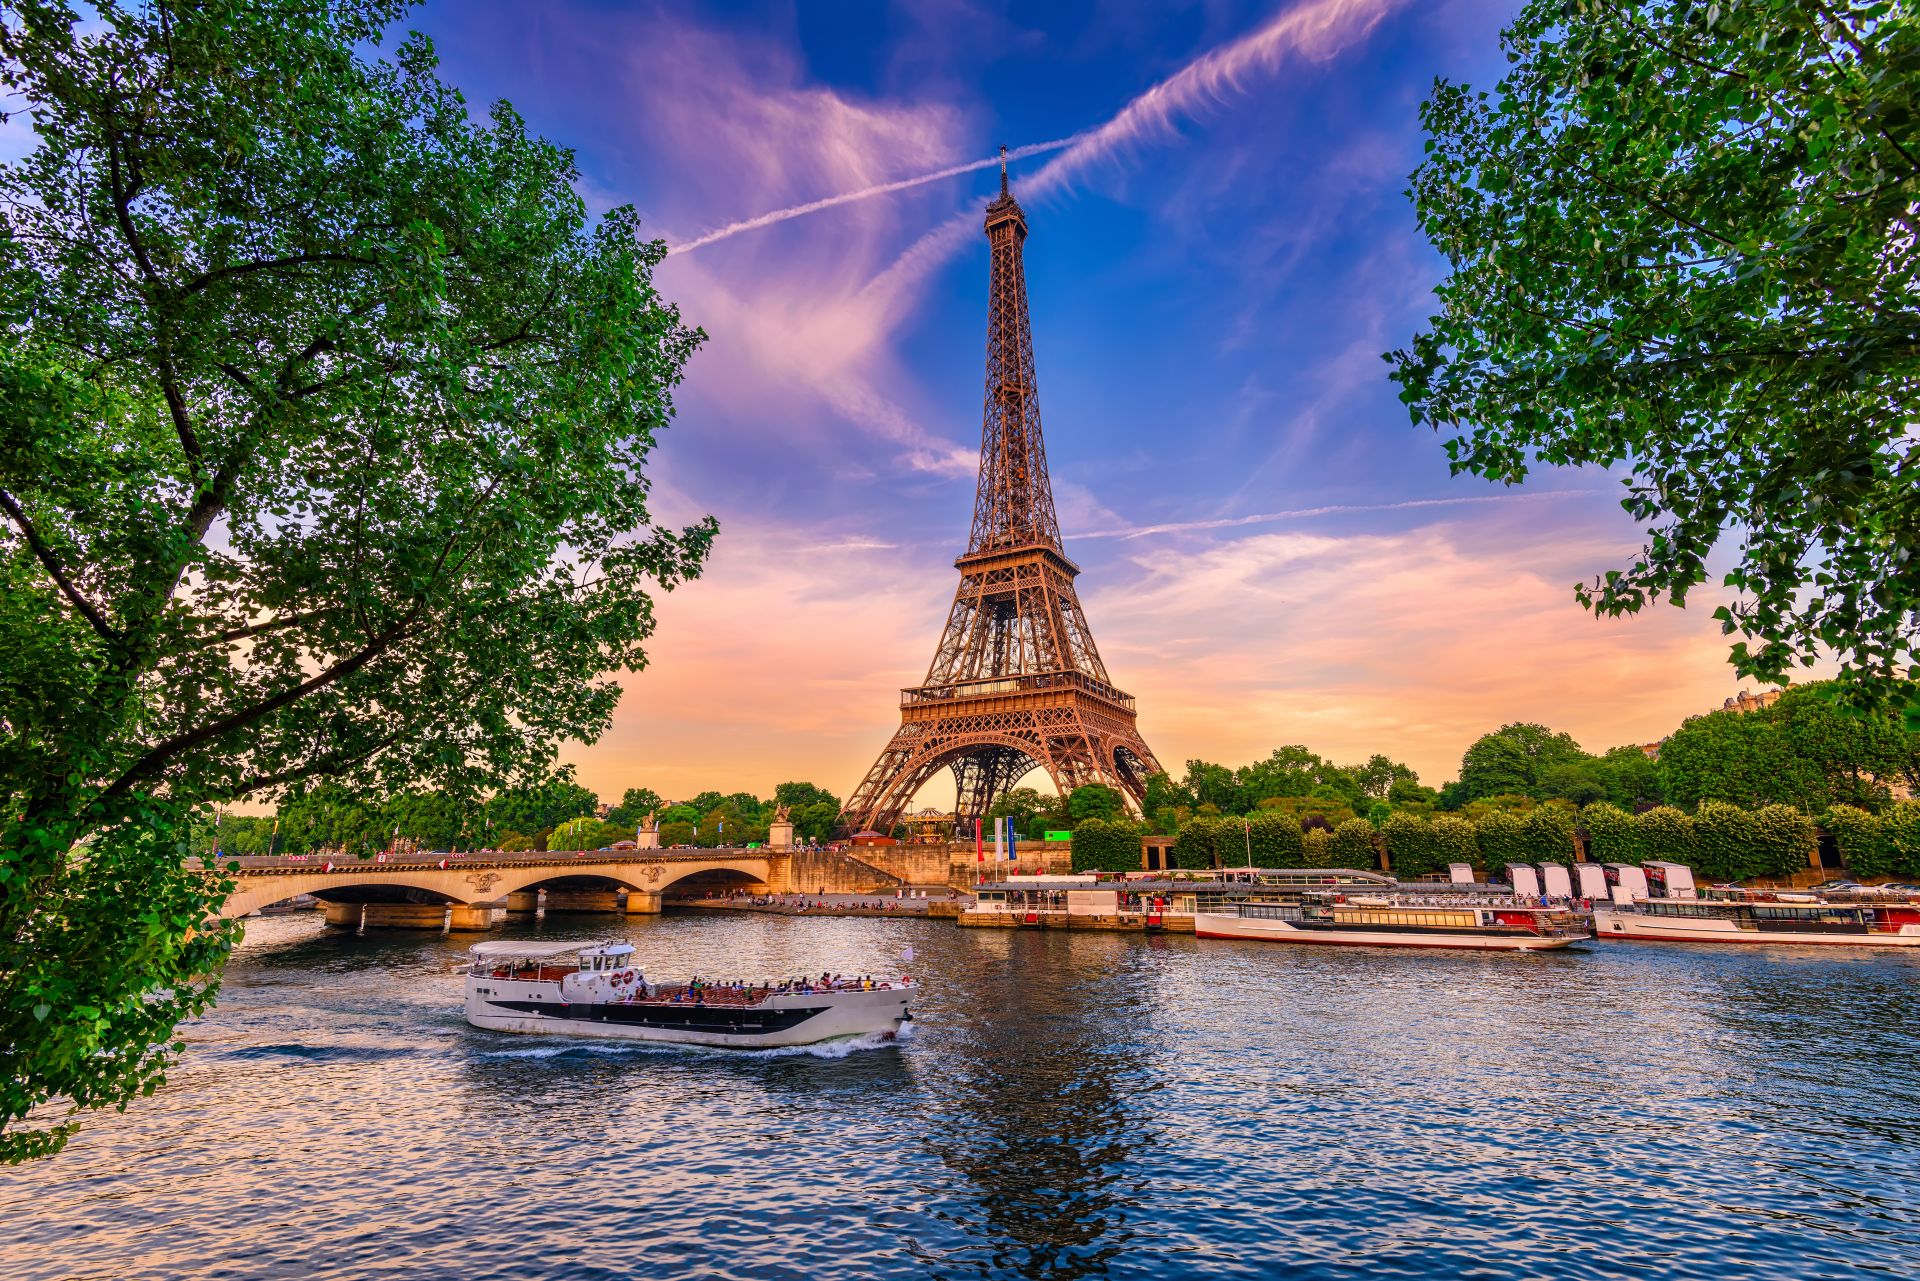 The Eiffel Tower in Paris and the Seine River